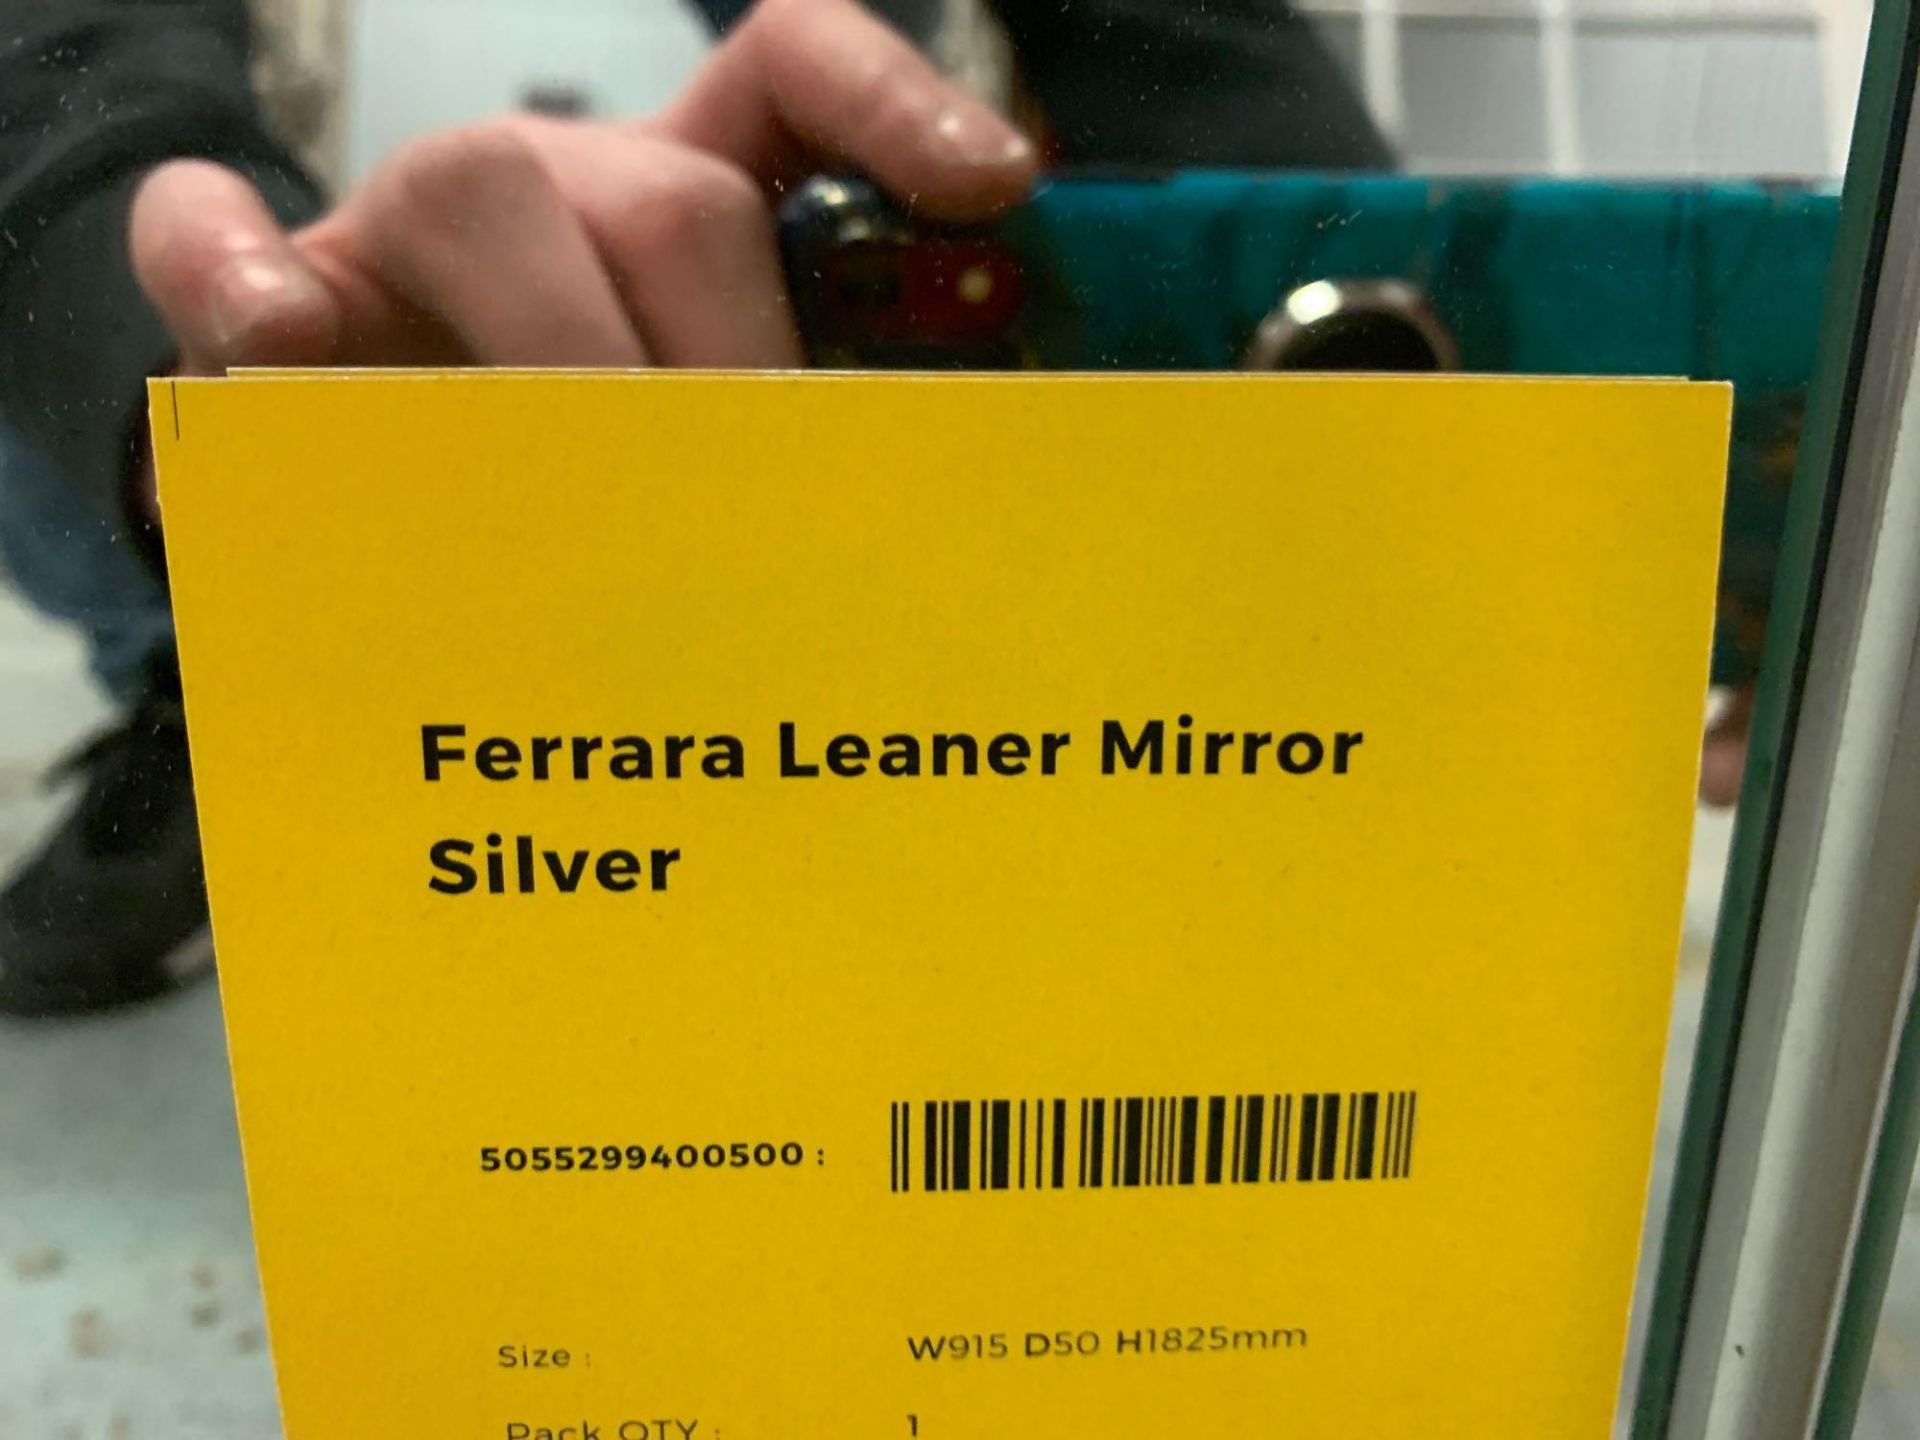 Ferrara Leaner Mirror Silver 1825 X 910mm Wide Bevelled Mirror Frame With Silver Outer Edges - Image 3 of 4